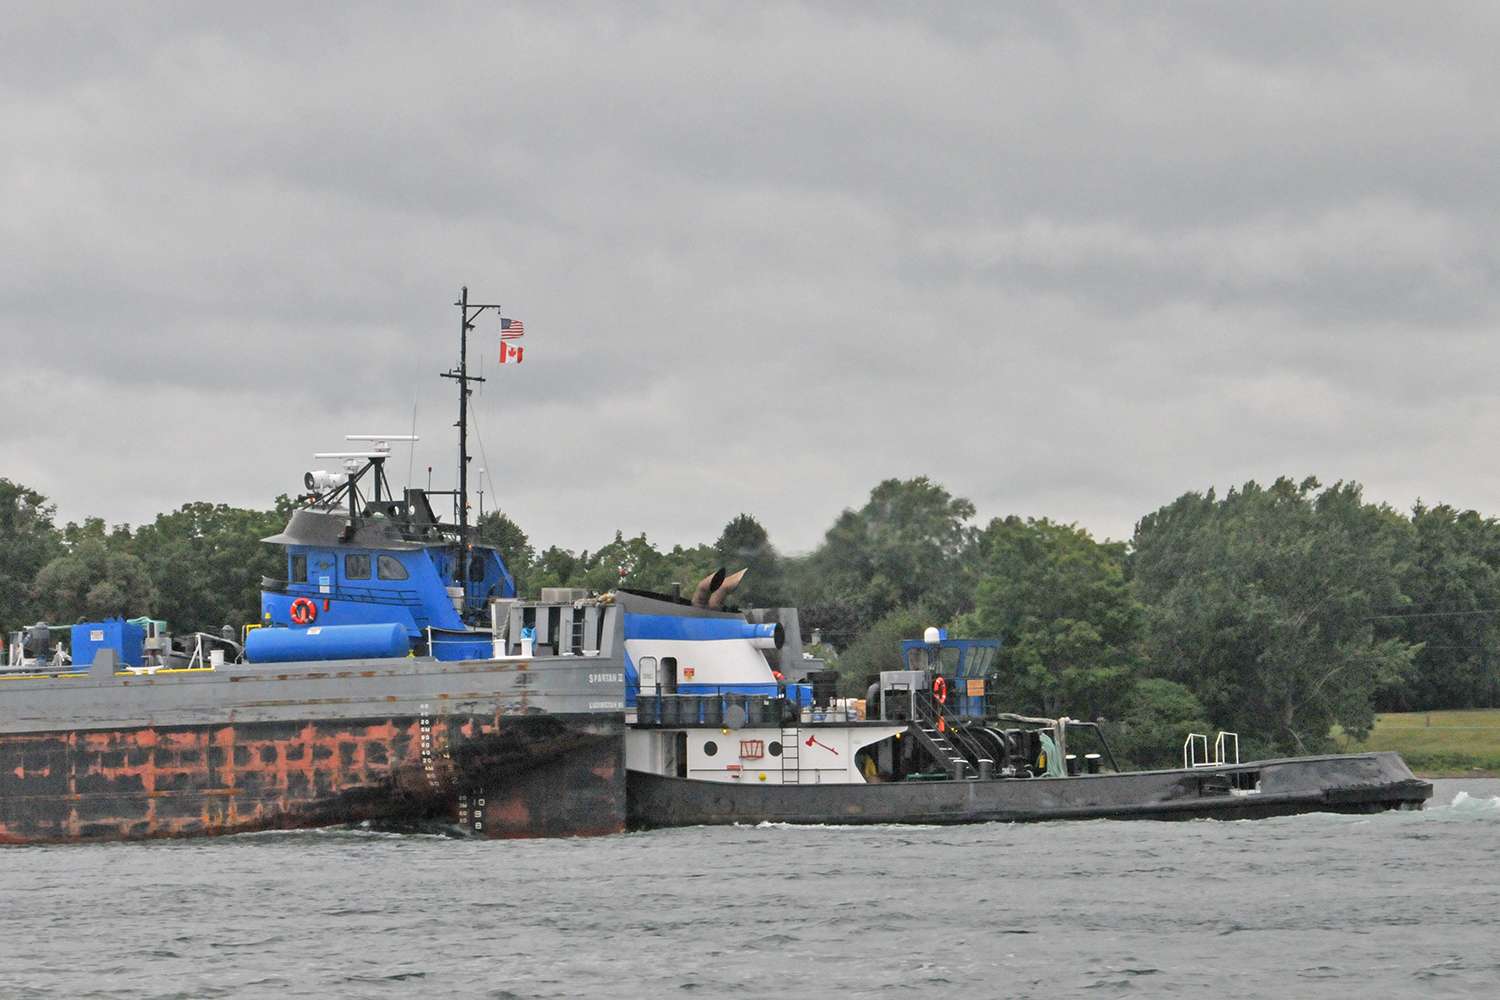 Barges and container ships are constant companions during a day on the St. Lawrence.